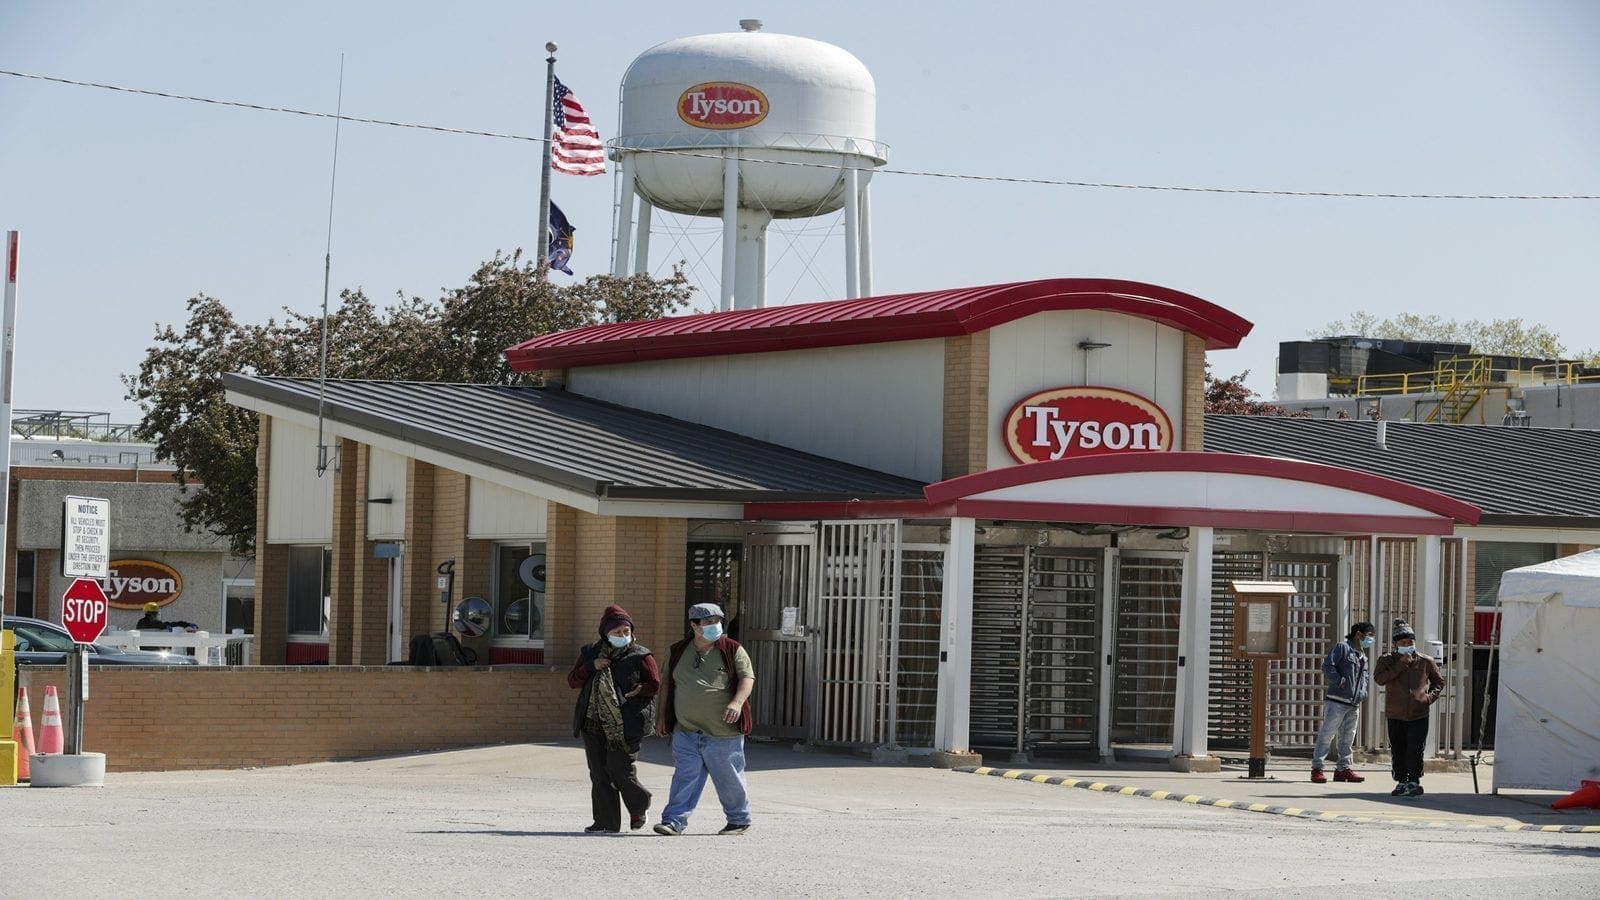 Tyson Foods bolsters sustainability efforts with new goal to achieve net zero emissions by 2050